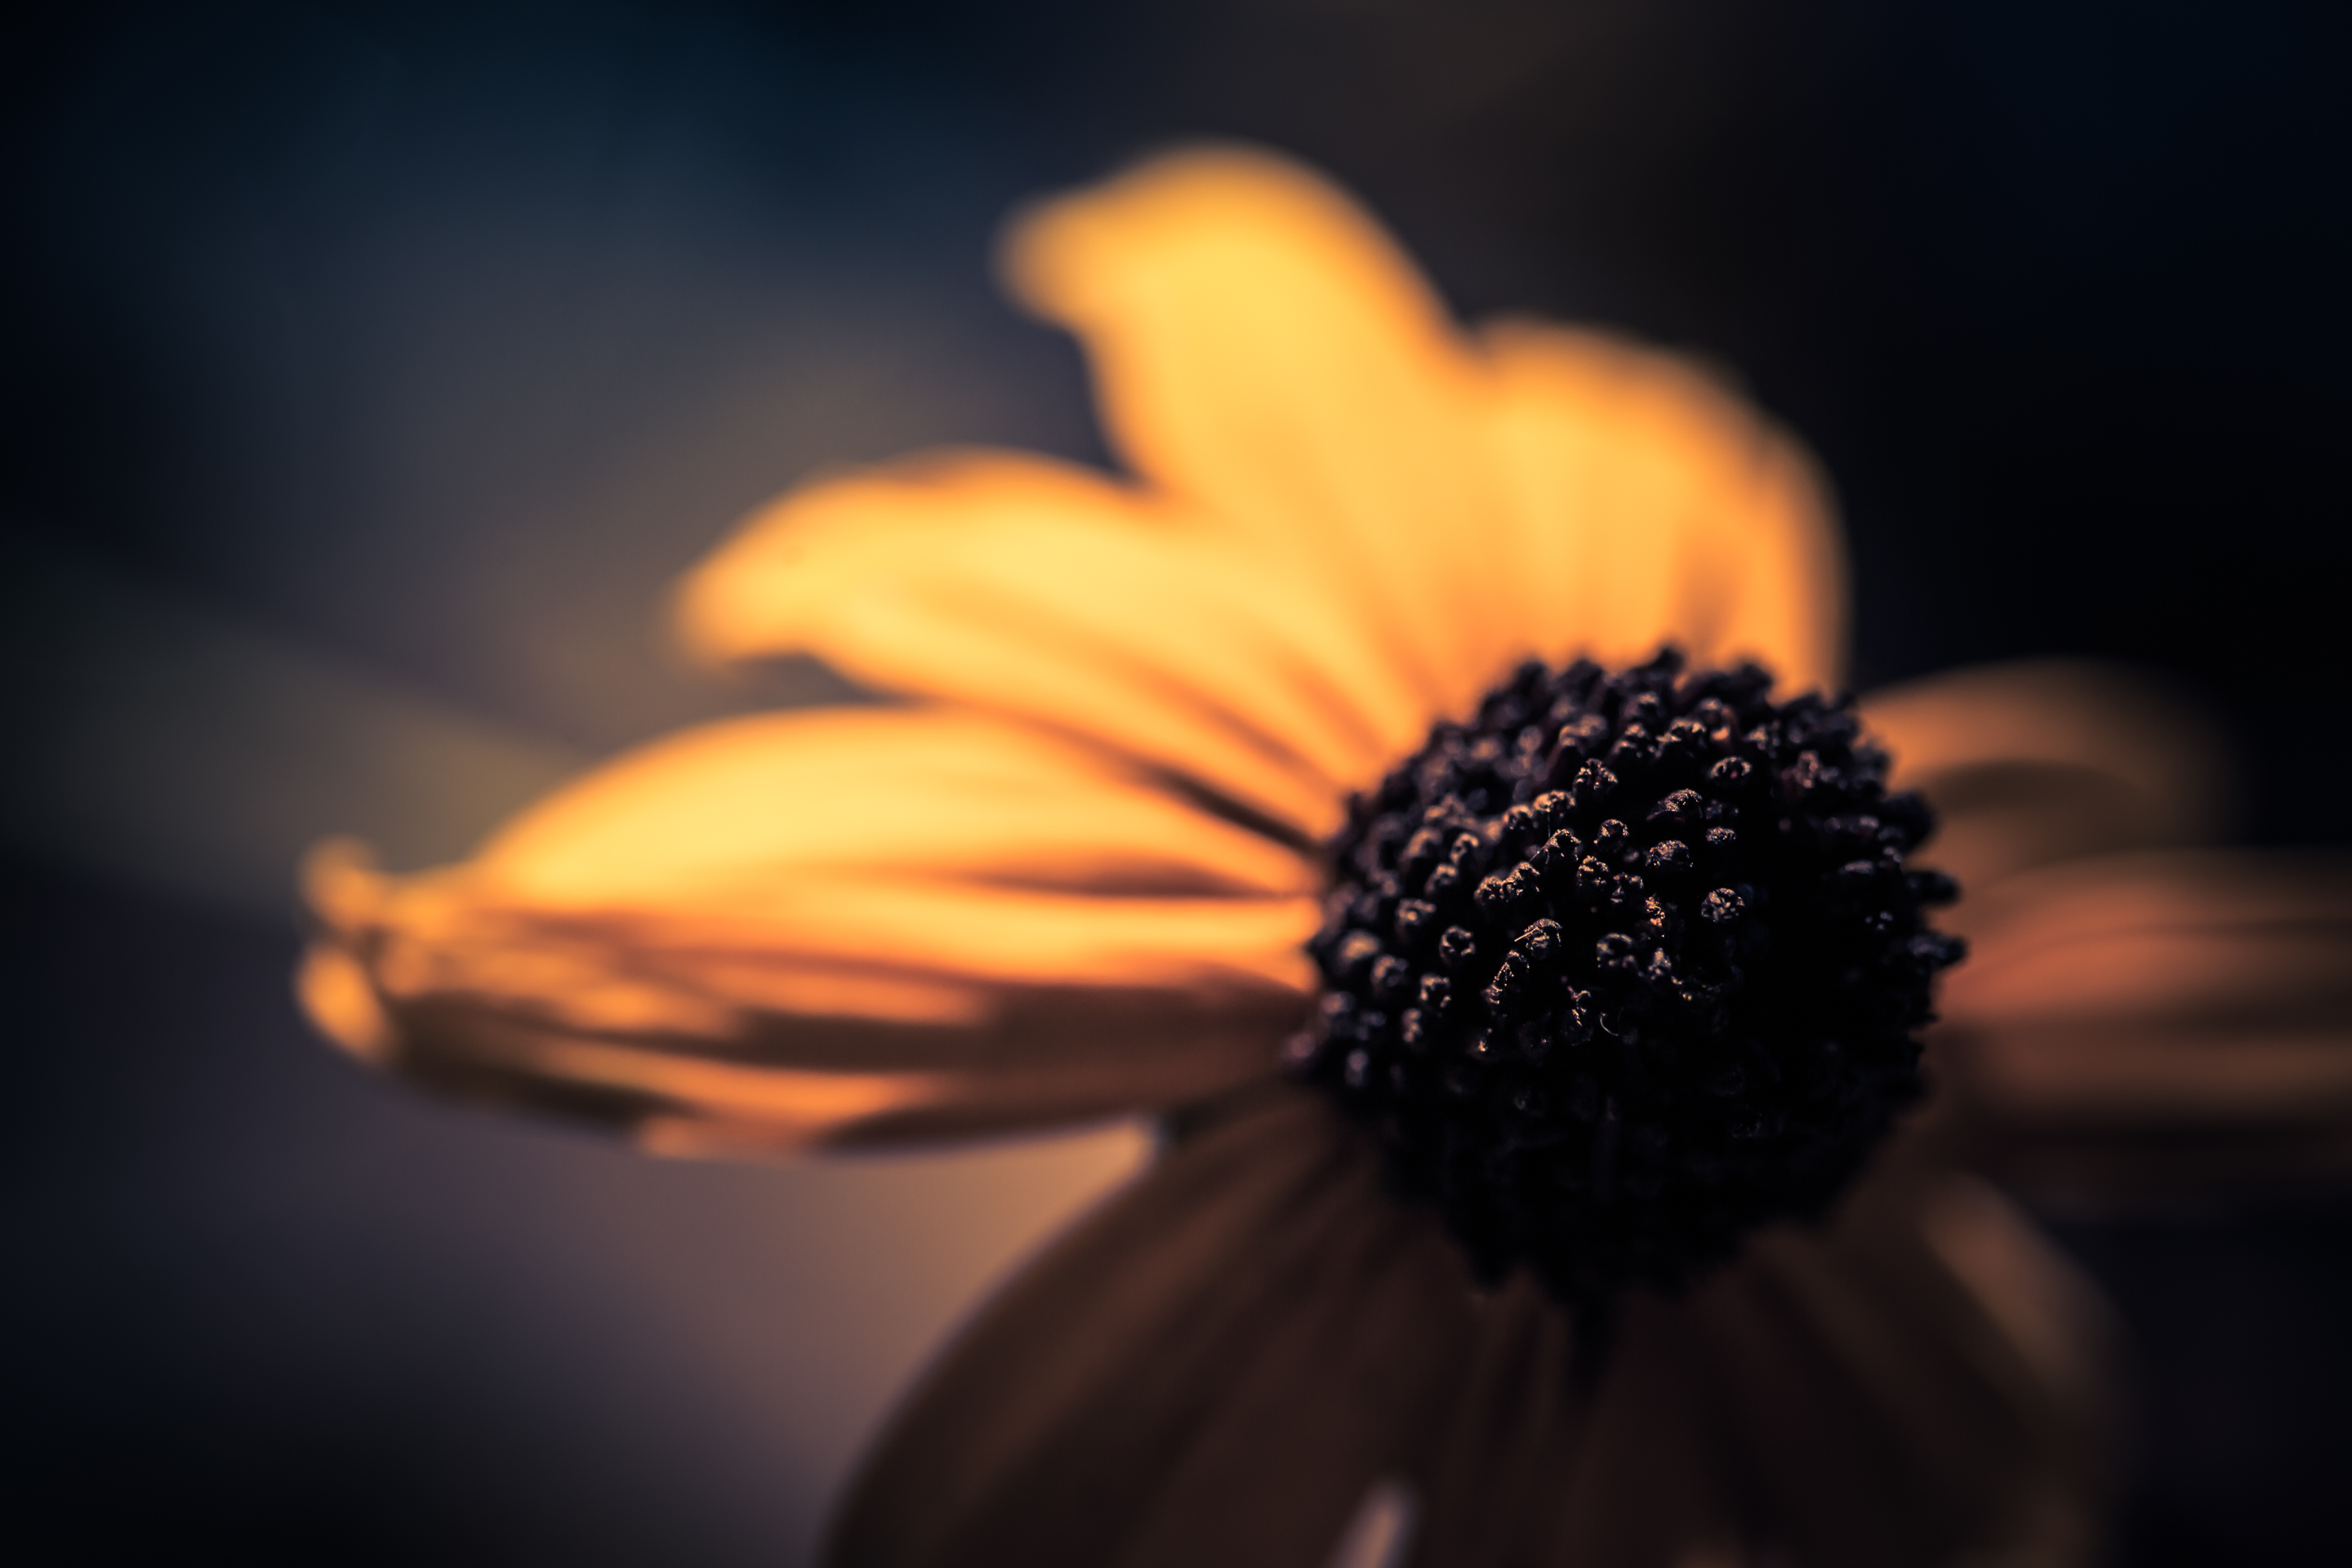 100mm low key macro photo of a black-eyed susan flower with shallow depth of field and bokeh.